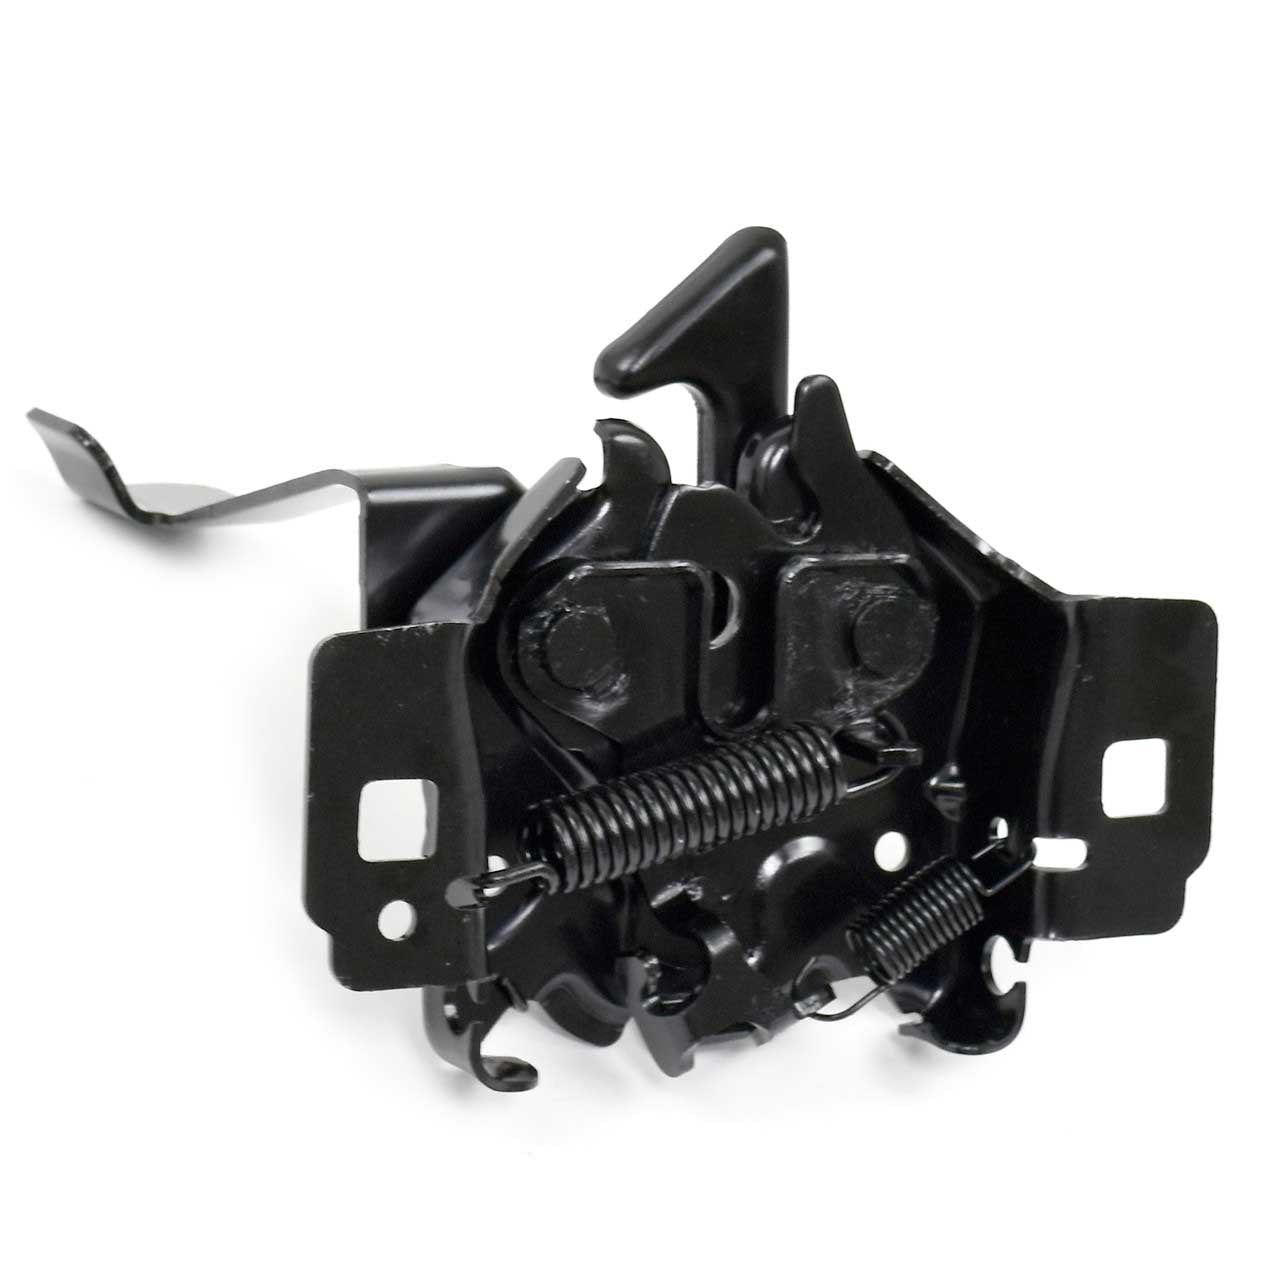 2010-2014 Ford Mustang Engine Hood Latch Lock Release Assembly Black